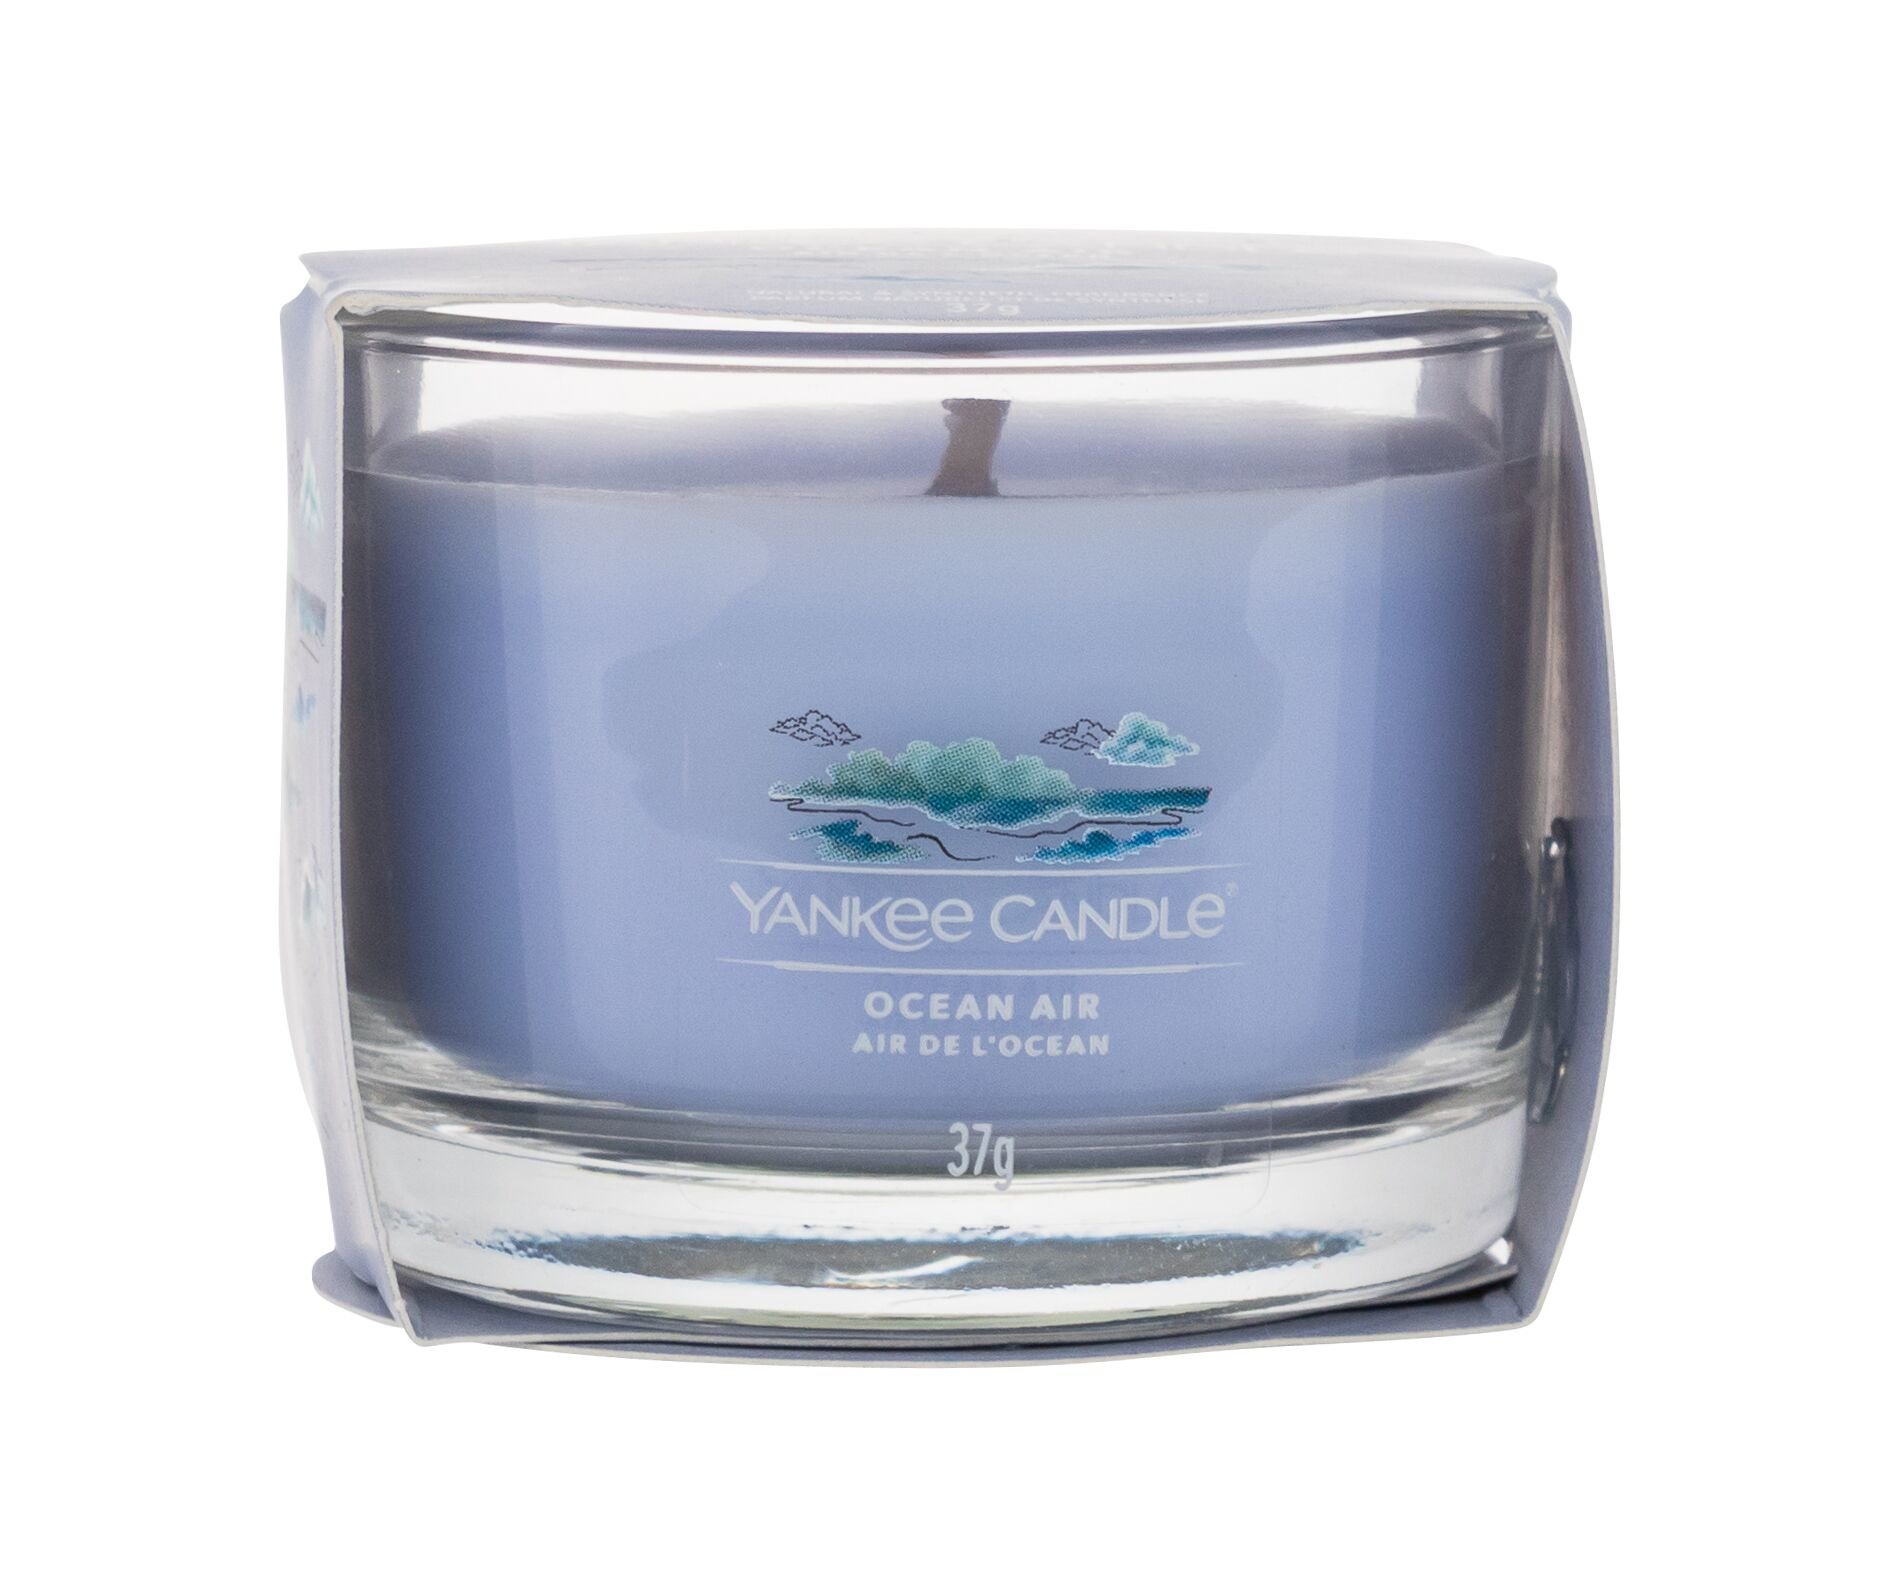 Yankee Candle Ocean Air 37g Kvepalai Unisex Scented Candle